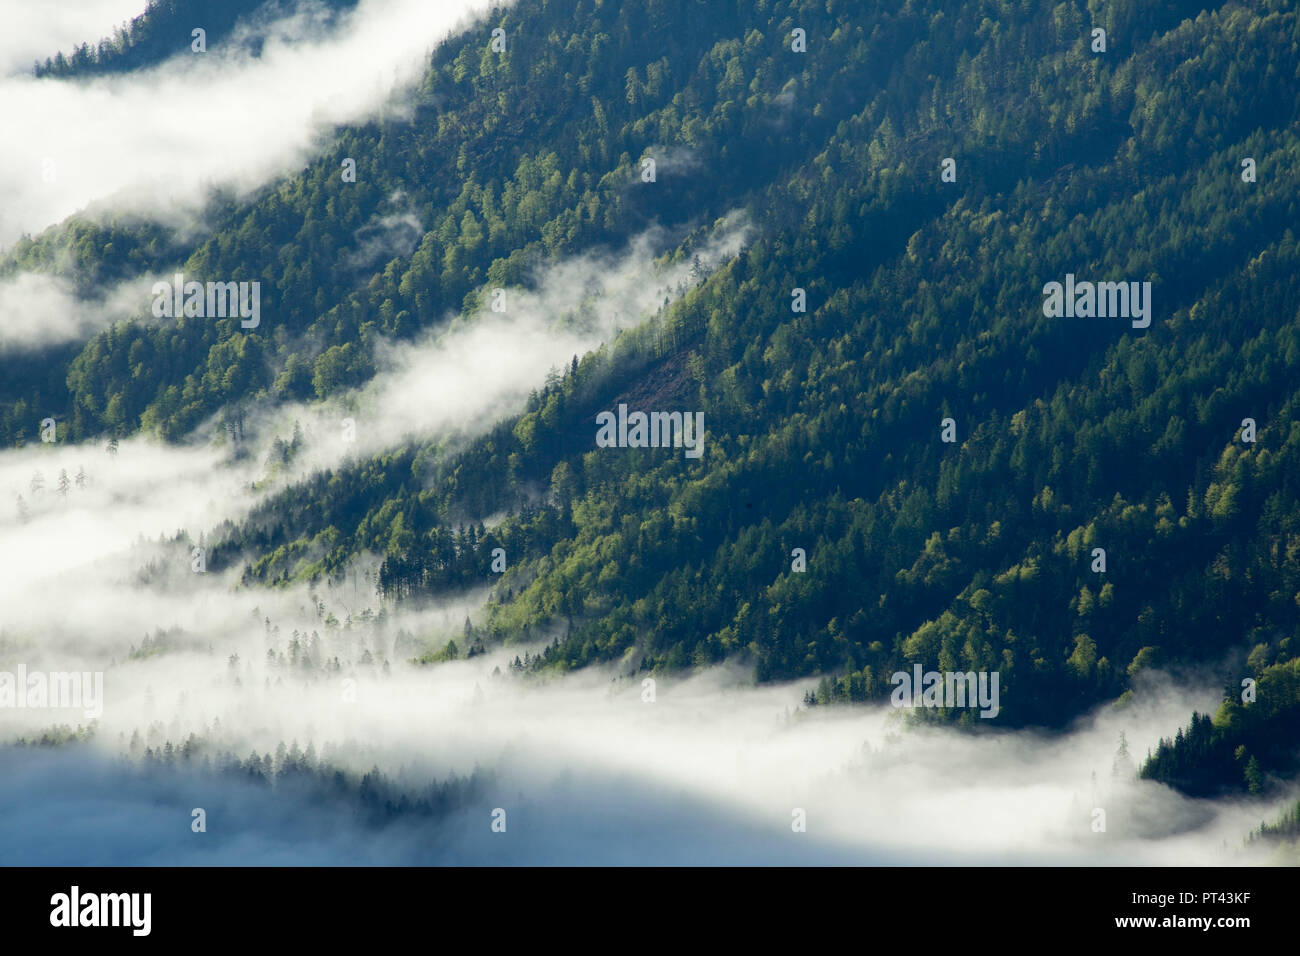 Wafts of mist in Strubtal at sunrise, Lofer mountains, Tyrol, Austria. Stock Photo